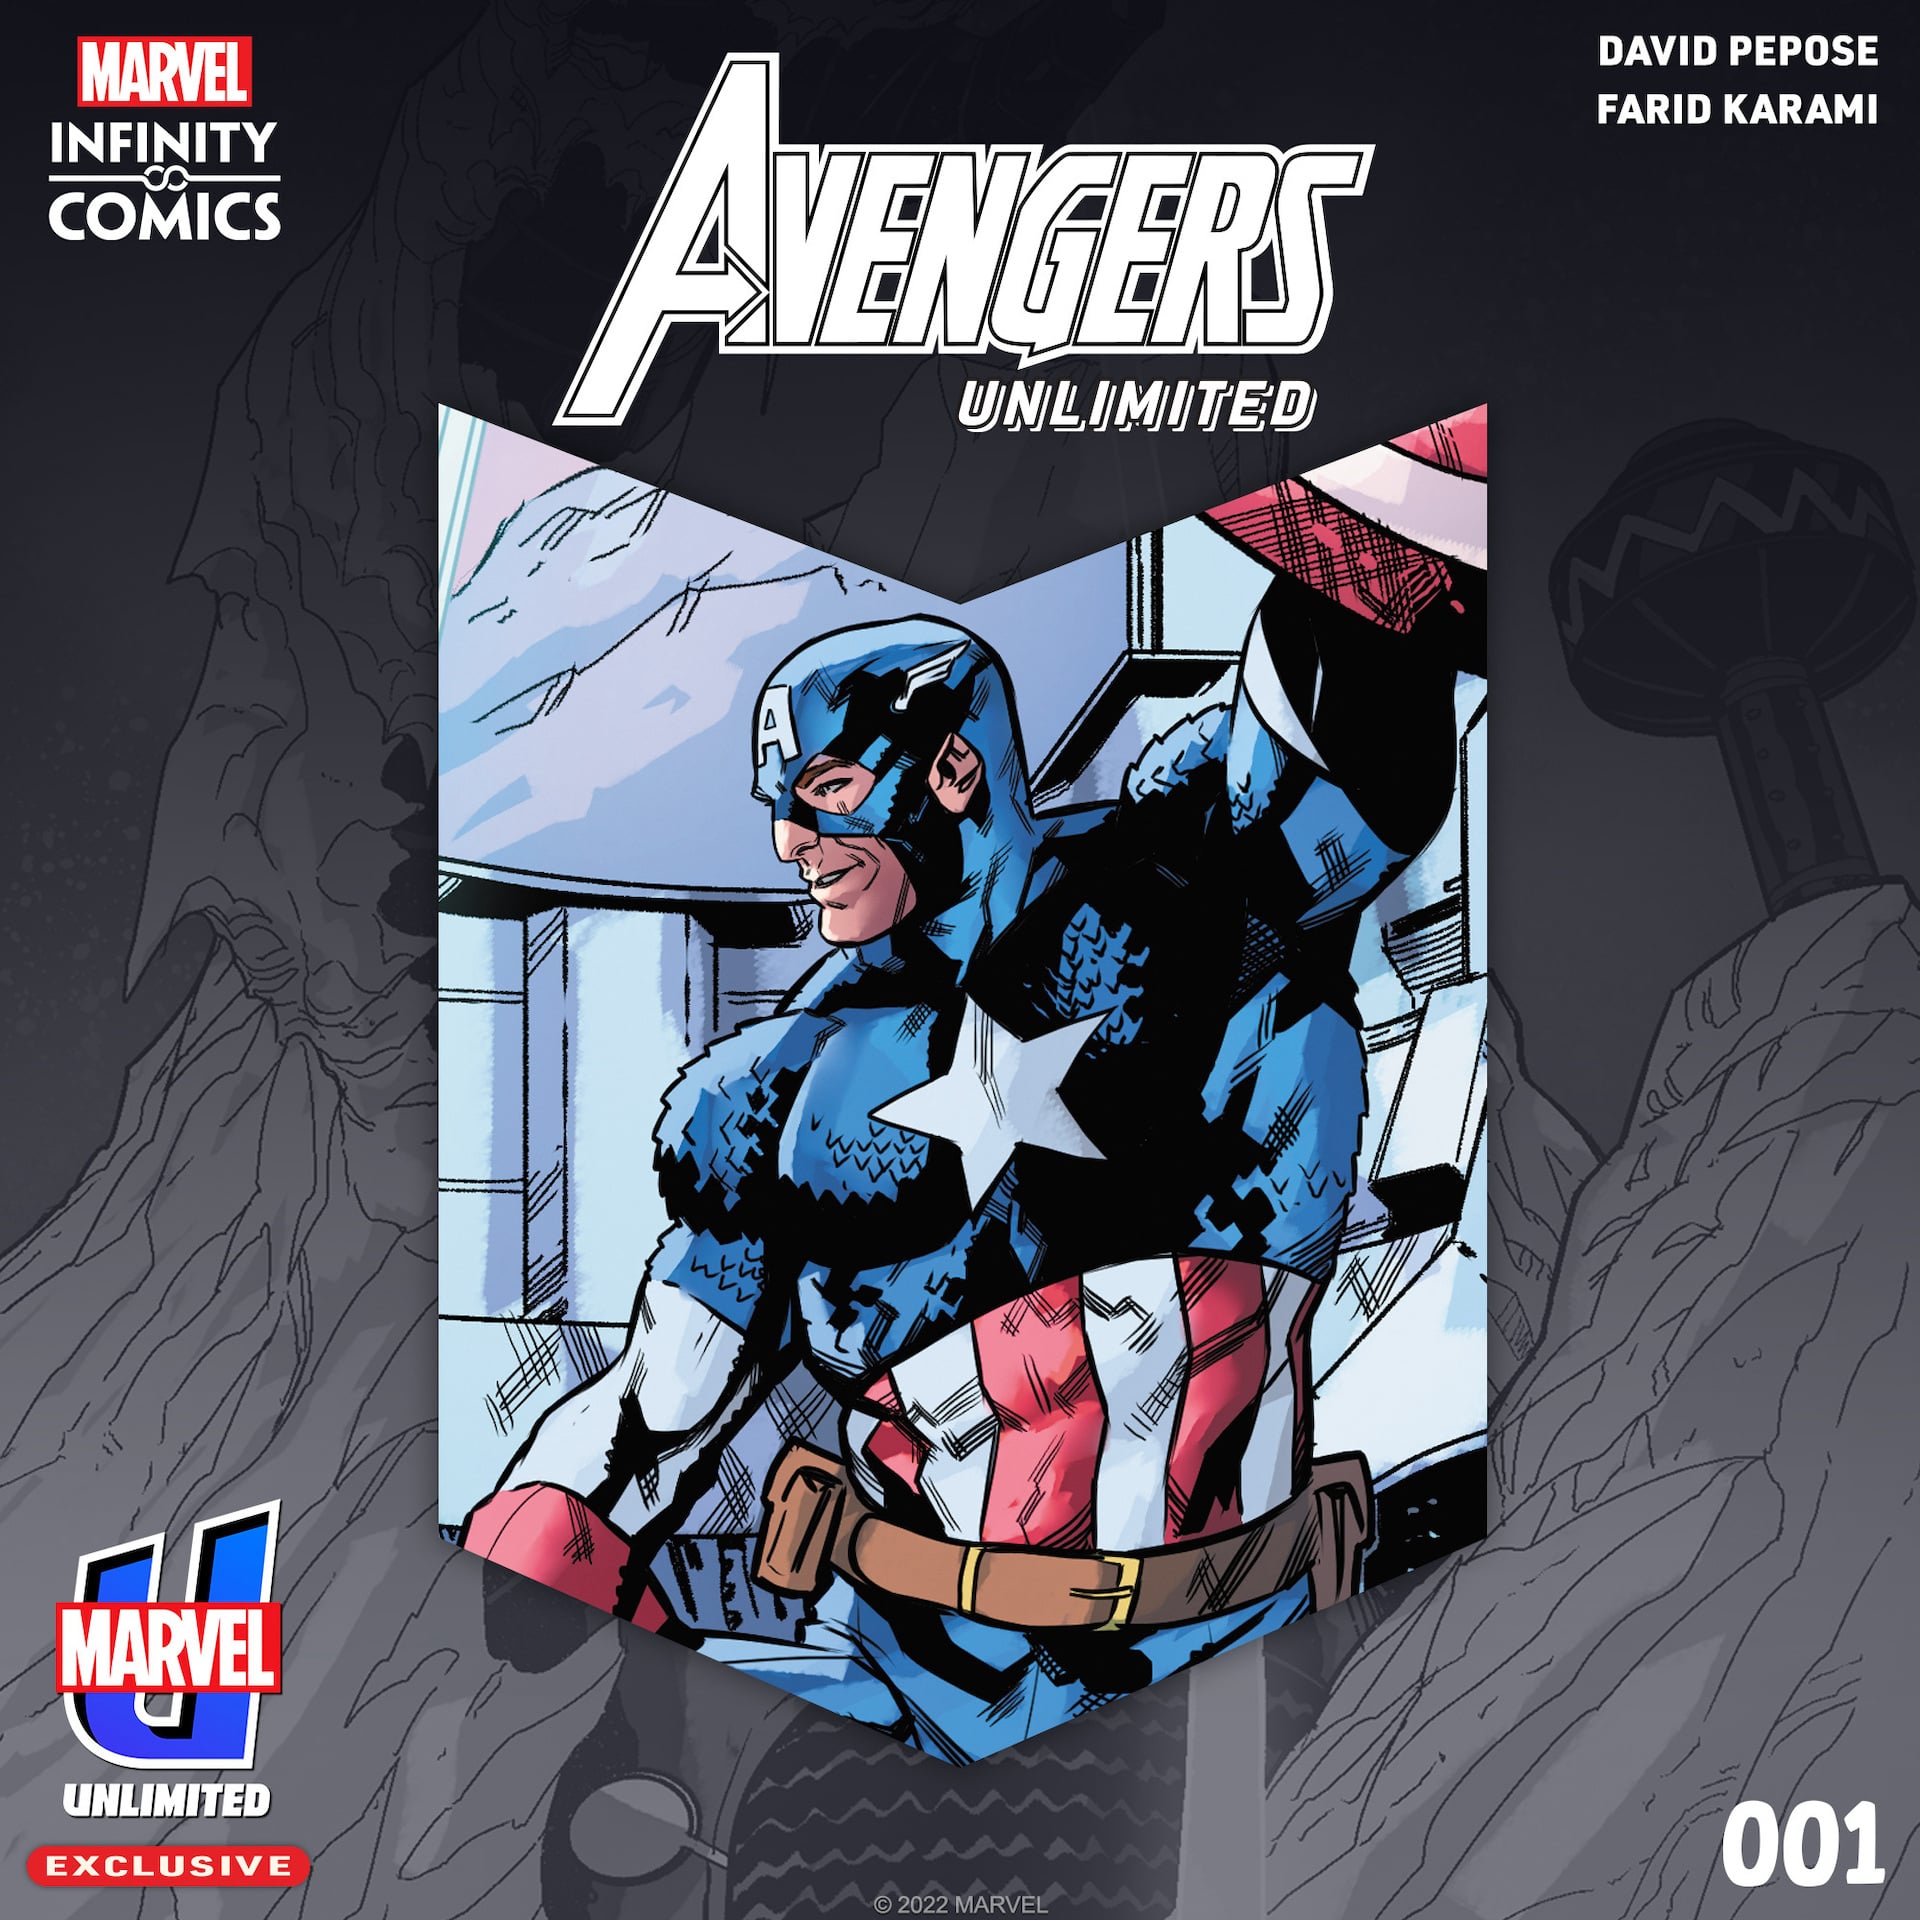 Marvel launches 'Avengers Unlimited' #1 on Marvel Unlimited today